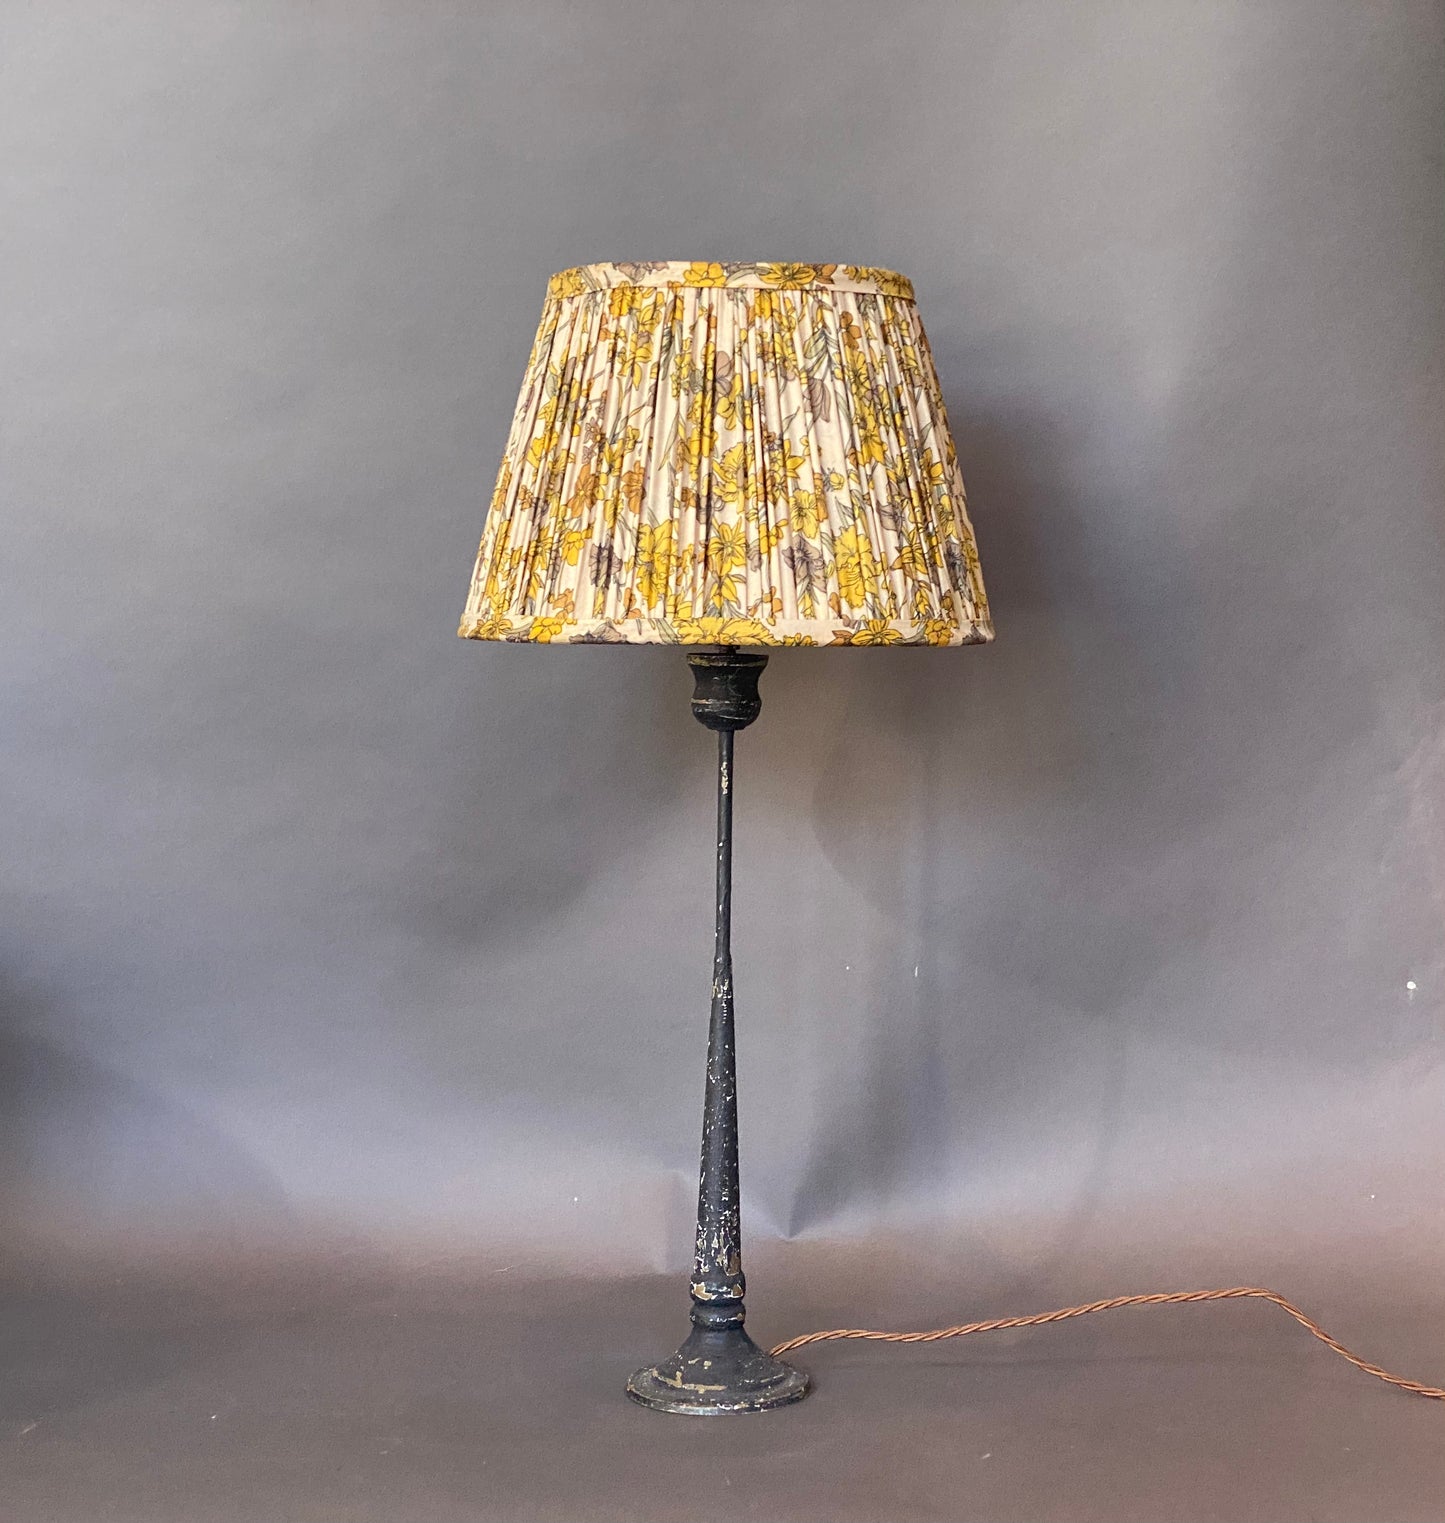 Yellow and grey floral silk Lampshade shown on a candlestick lamp base